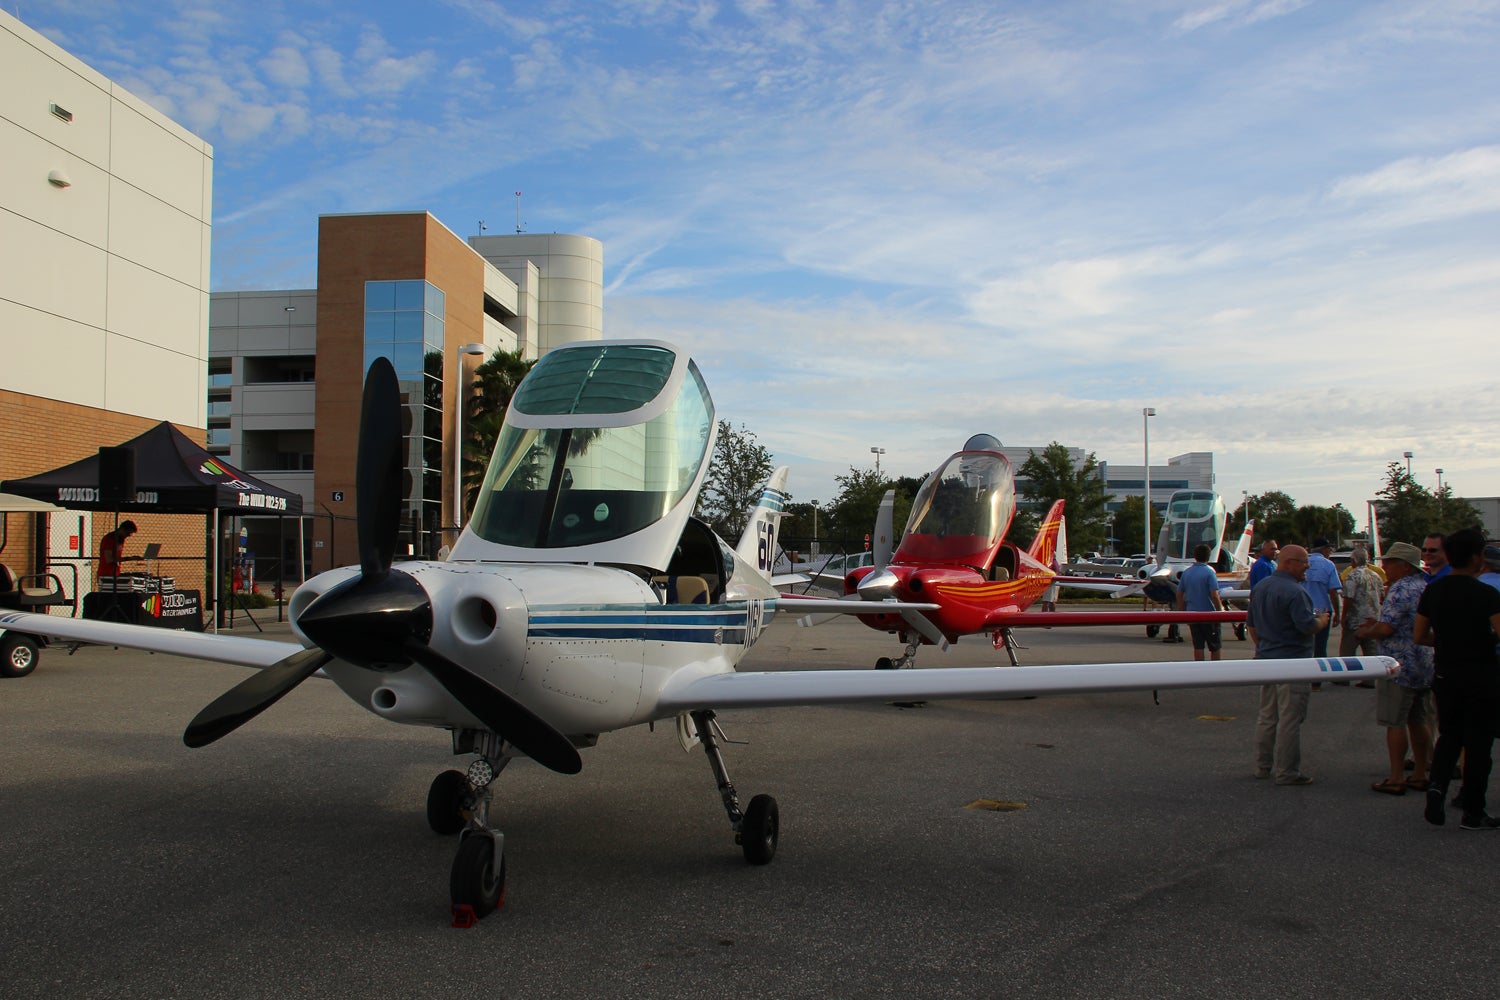 Embry-Riddle Alumni Fly-In